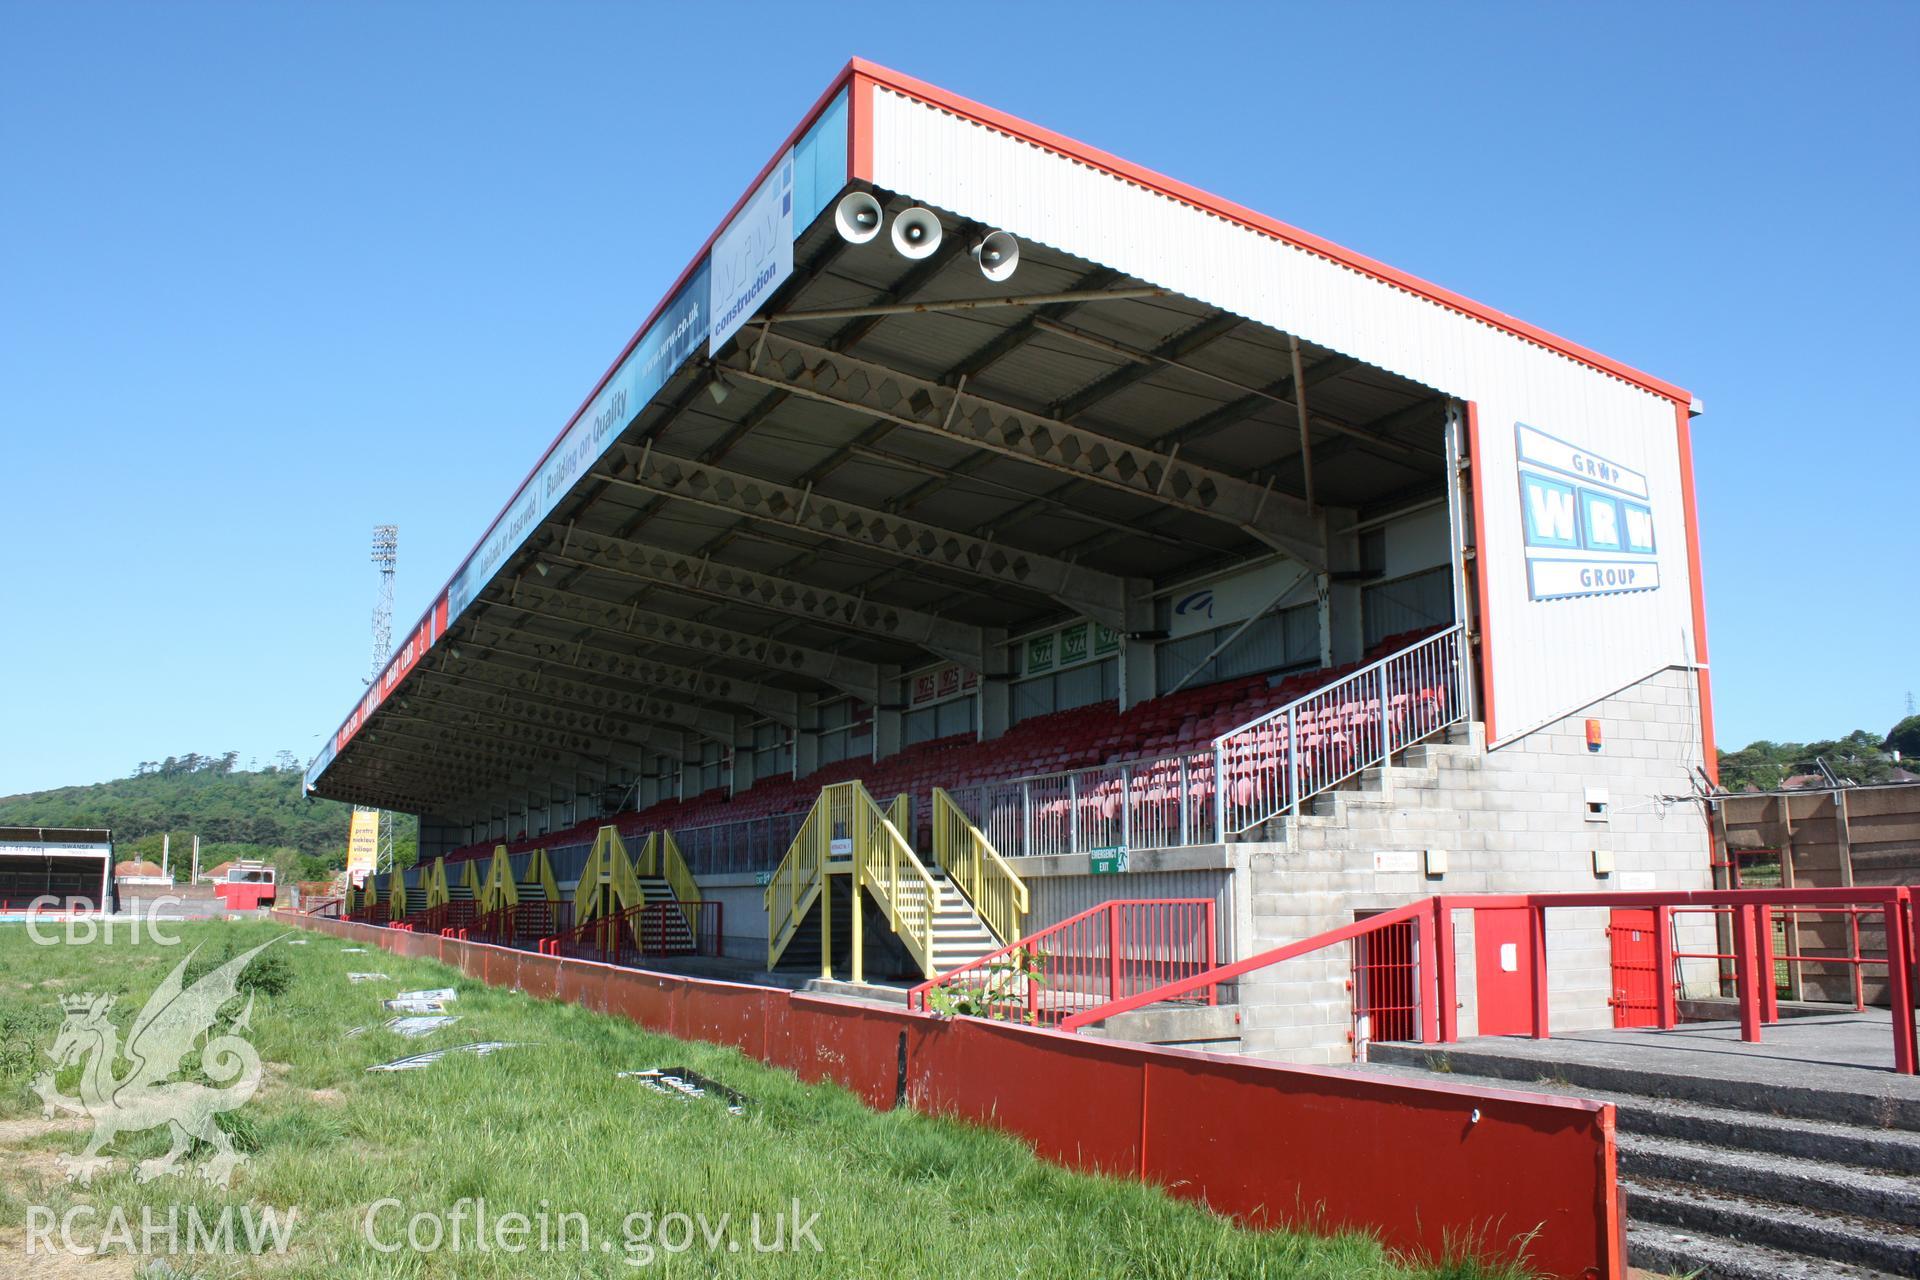 North Stand, looking west